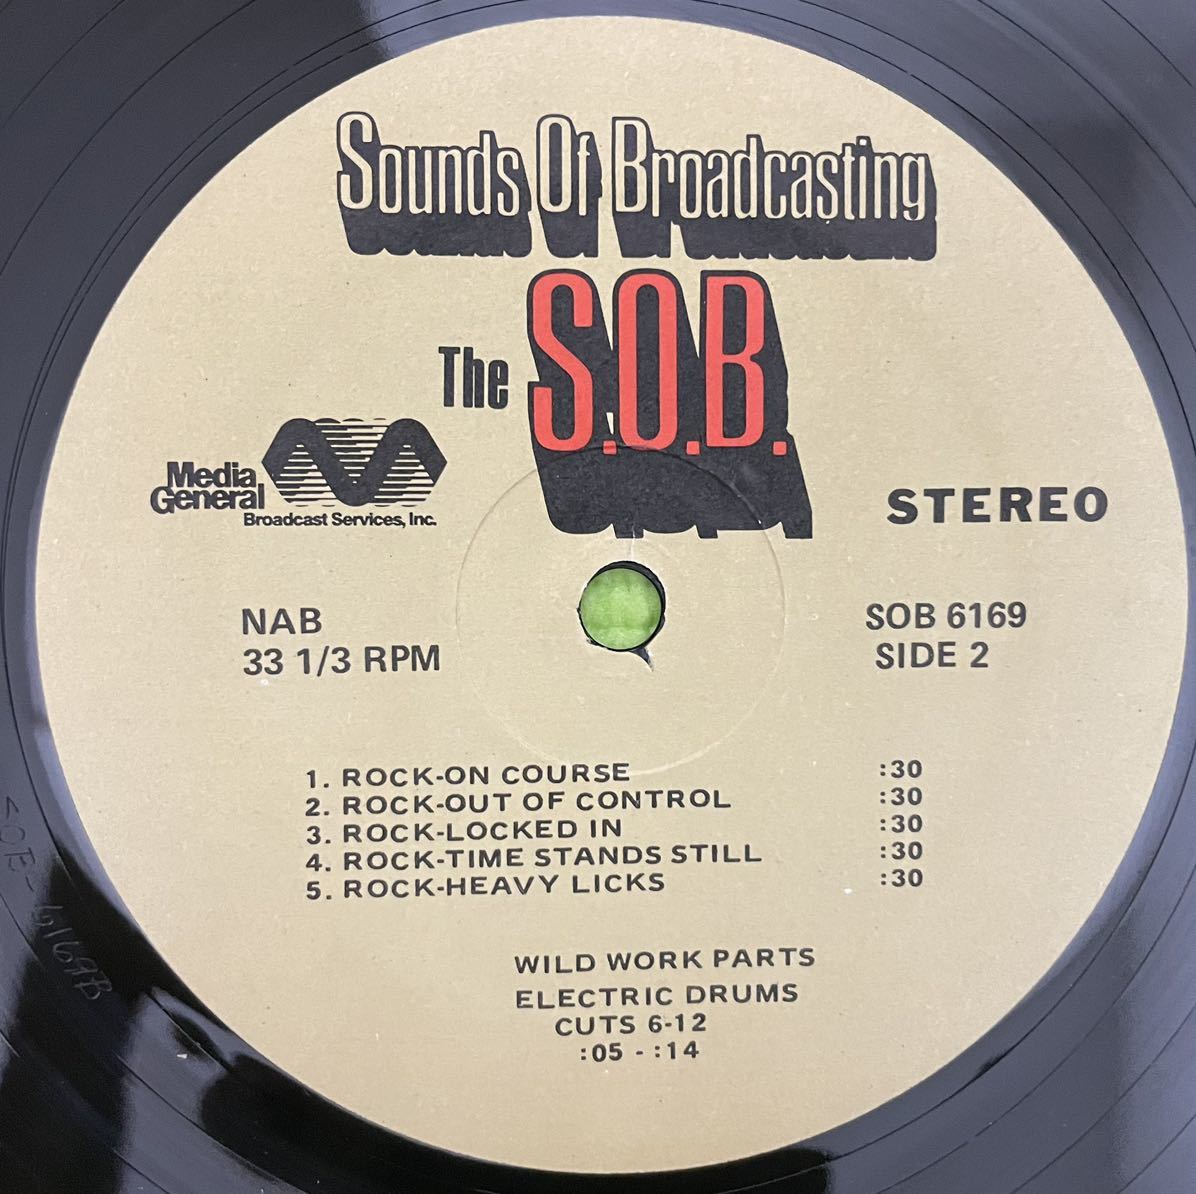 Raregroove electro sampling record レアグルーブ　エレクトロ　サンプリング　レコード　sounds of broadcasting the s.o.b. Sob 6169_画像4